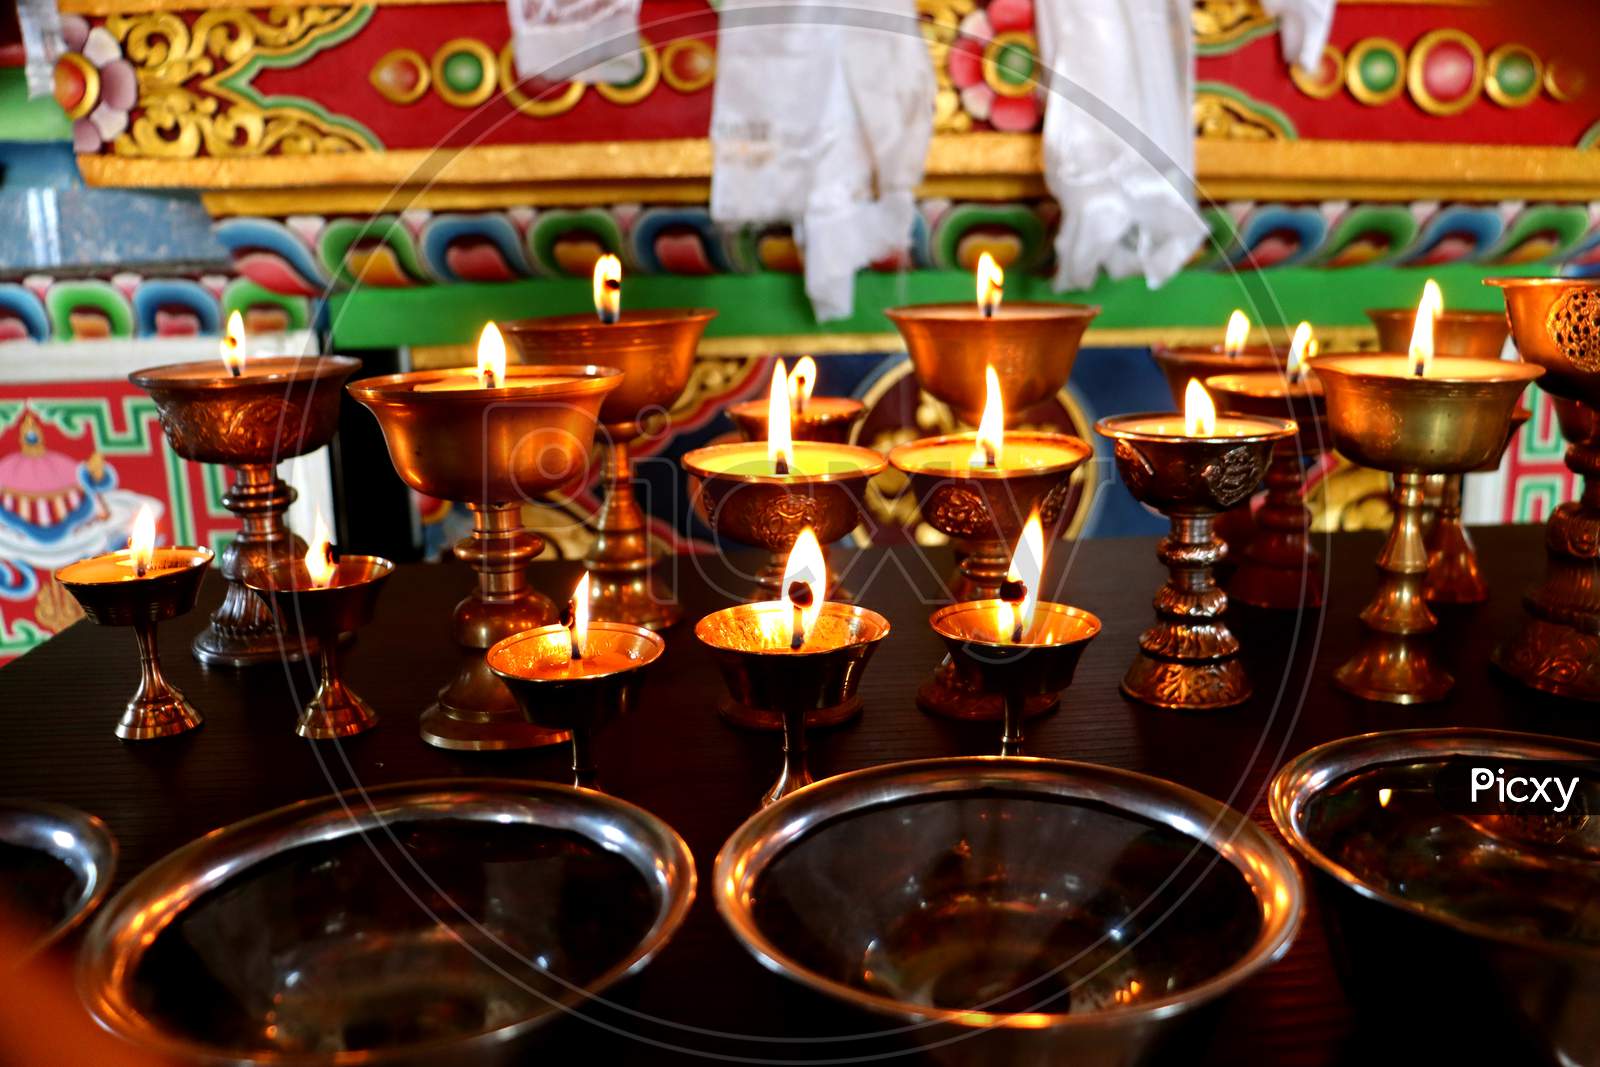 Candle Light,Beautiful Tranquil Scenic View Of Wax Lamps And Swaying Flame For Praying,Monastery Or A Charge